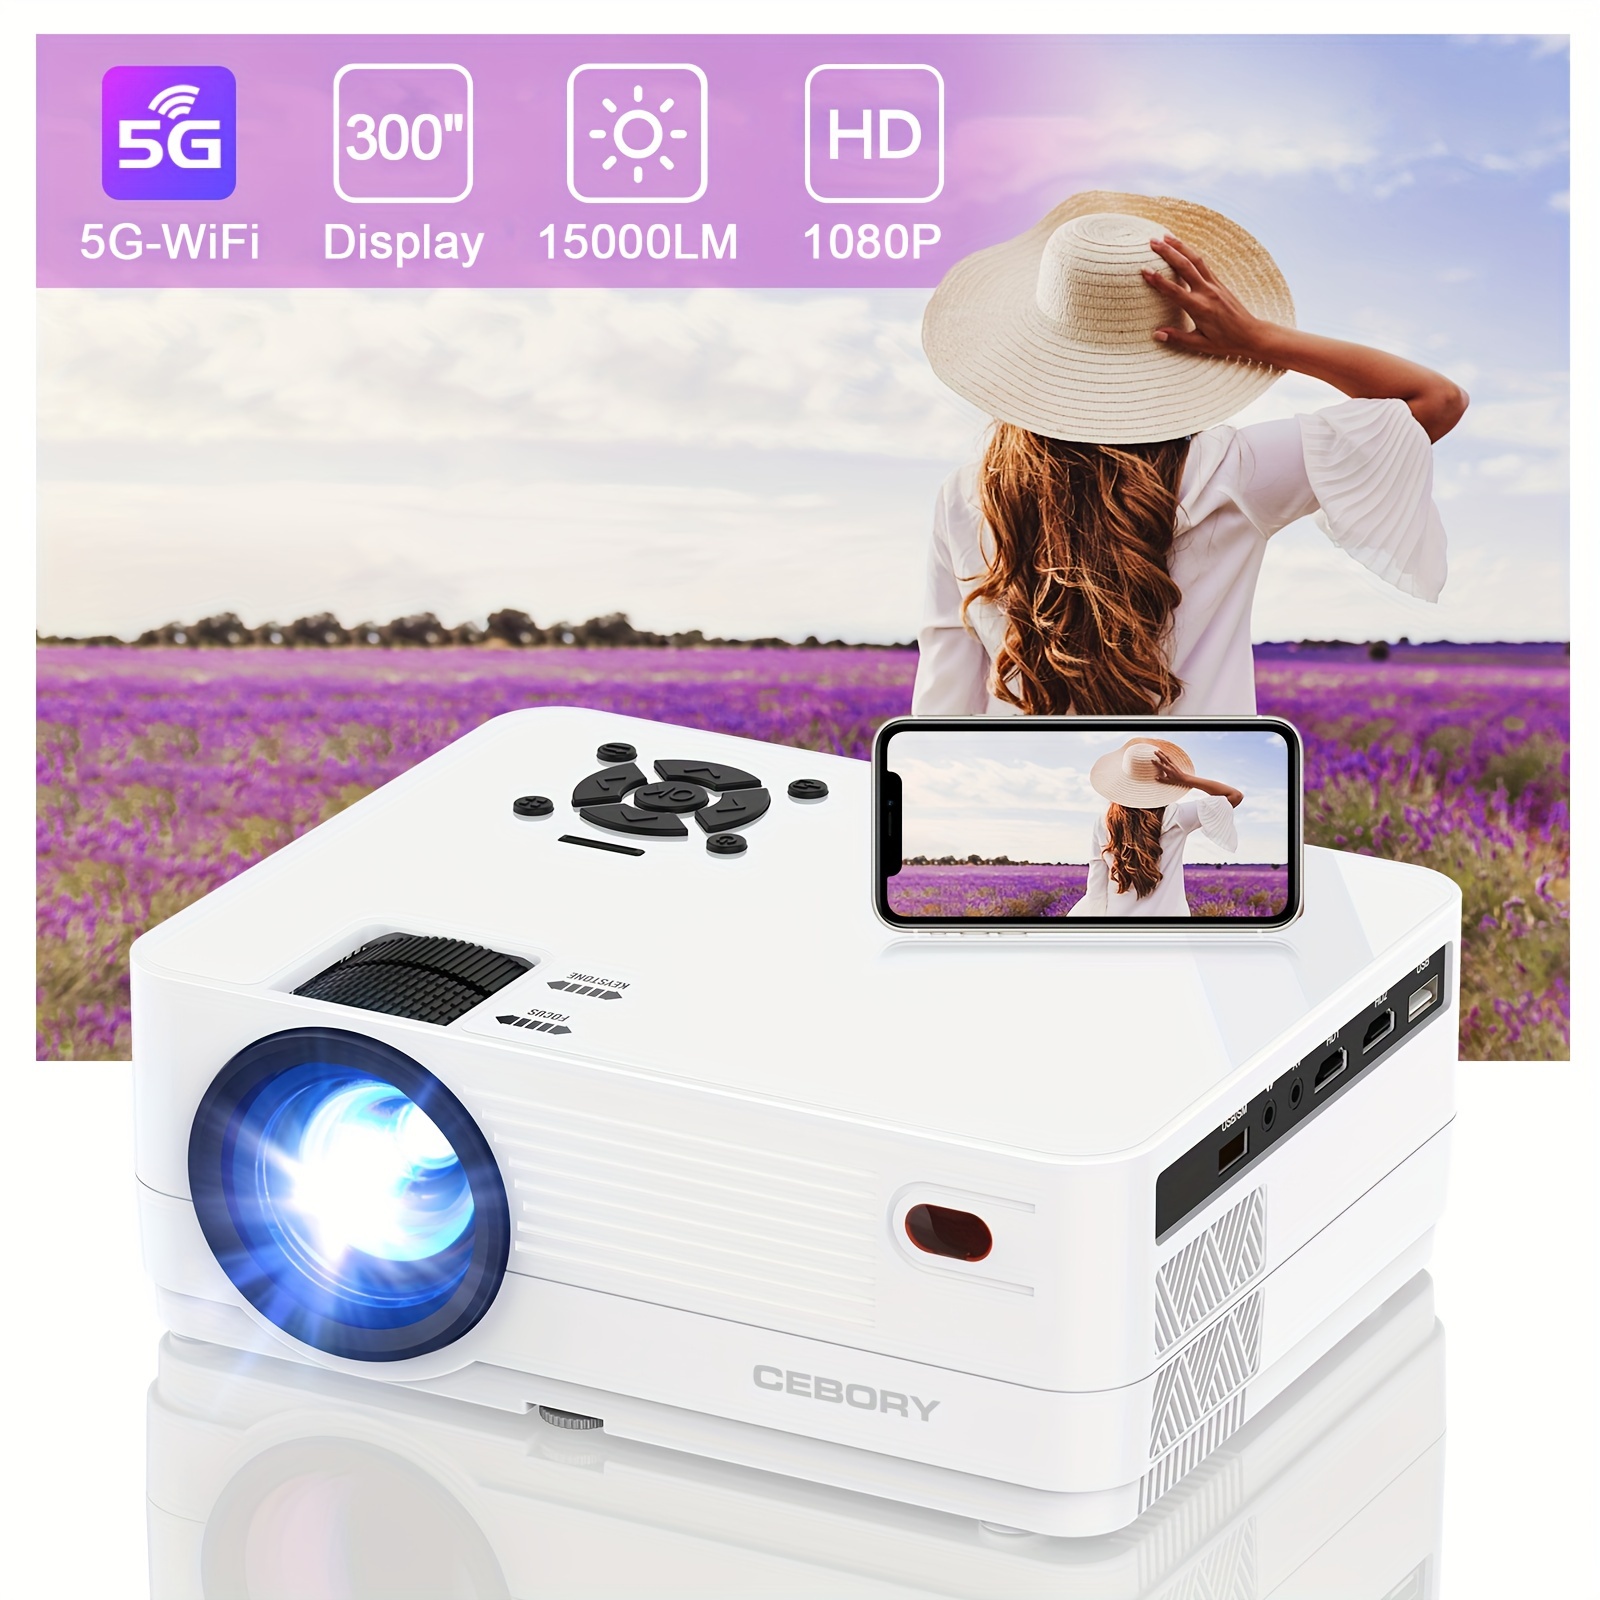 

Native 1080p 5g Wifi Bt Projector, Cebory 15000lm Full Hd Movie Projector, 300" Display For Outdoor Movies Support 4k Home Theater, Compatible With Ios/android/pc//ps4/tv